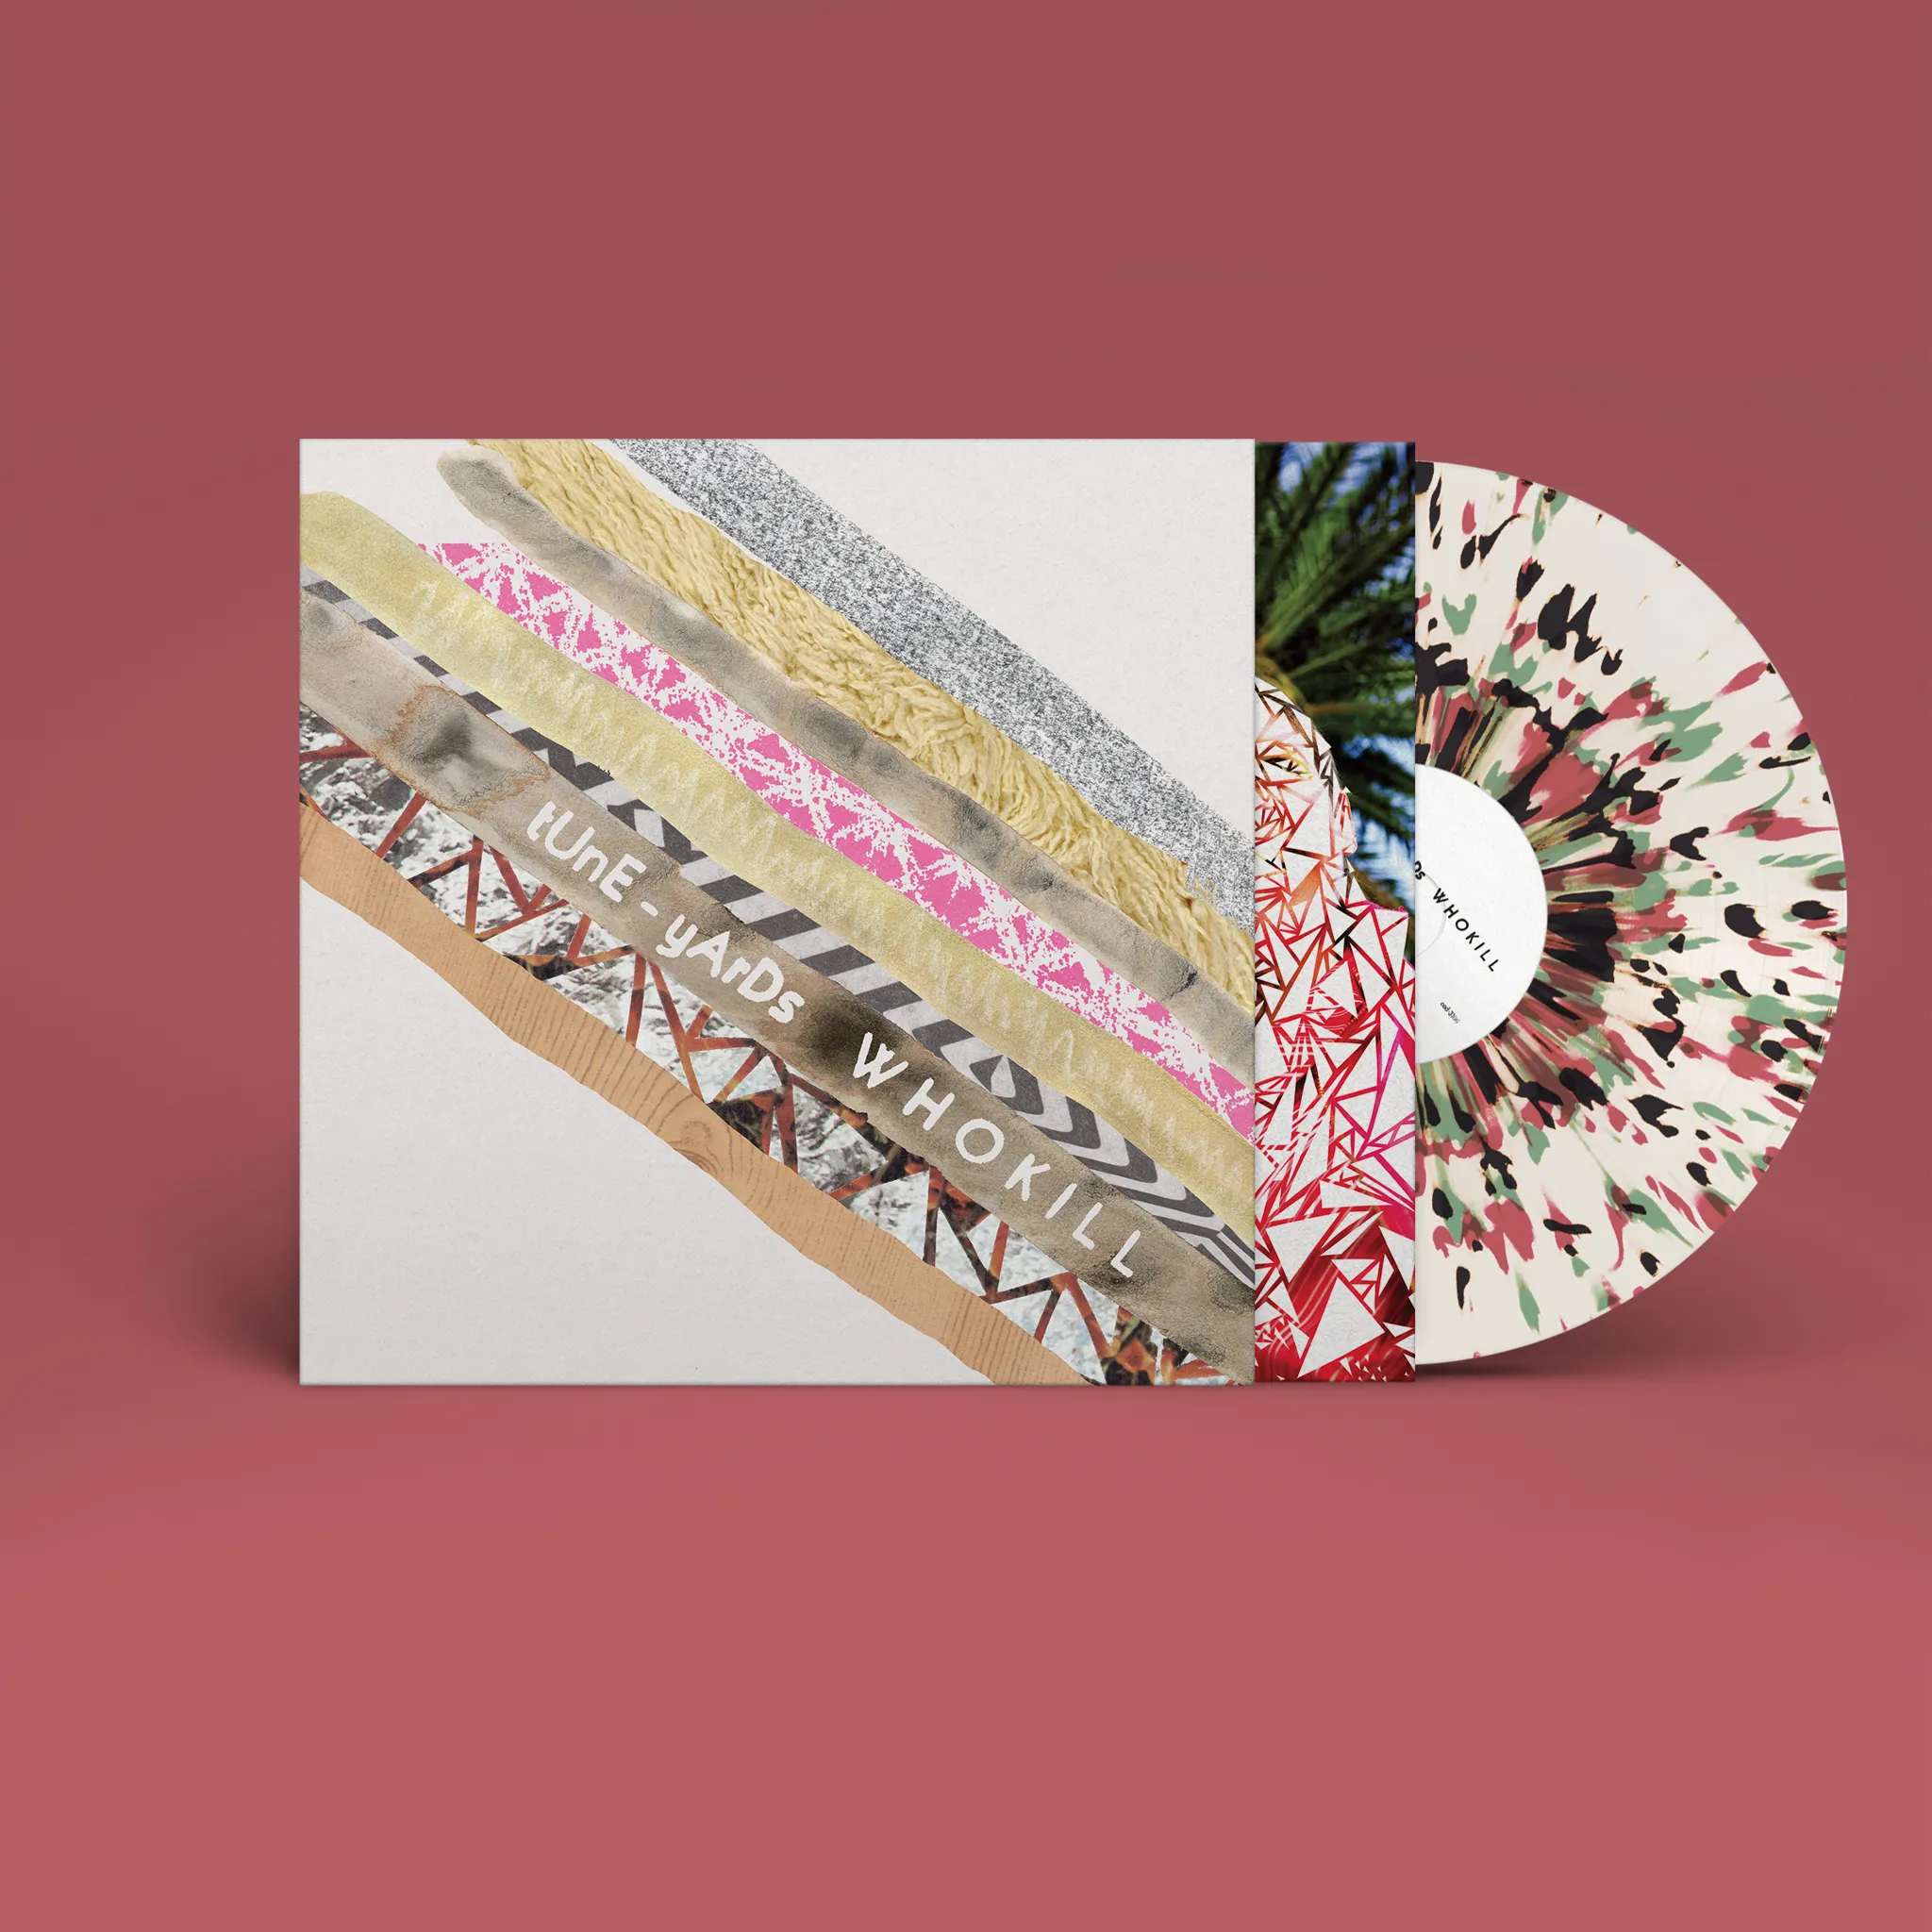 <strong>Tune-Yards - W H O K I L L</strong> (Vinyl LP - pink)